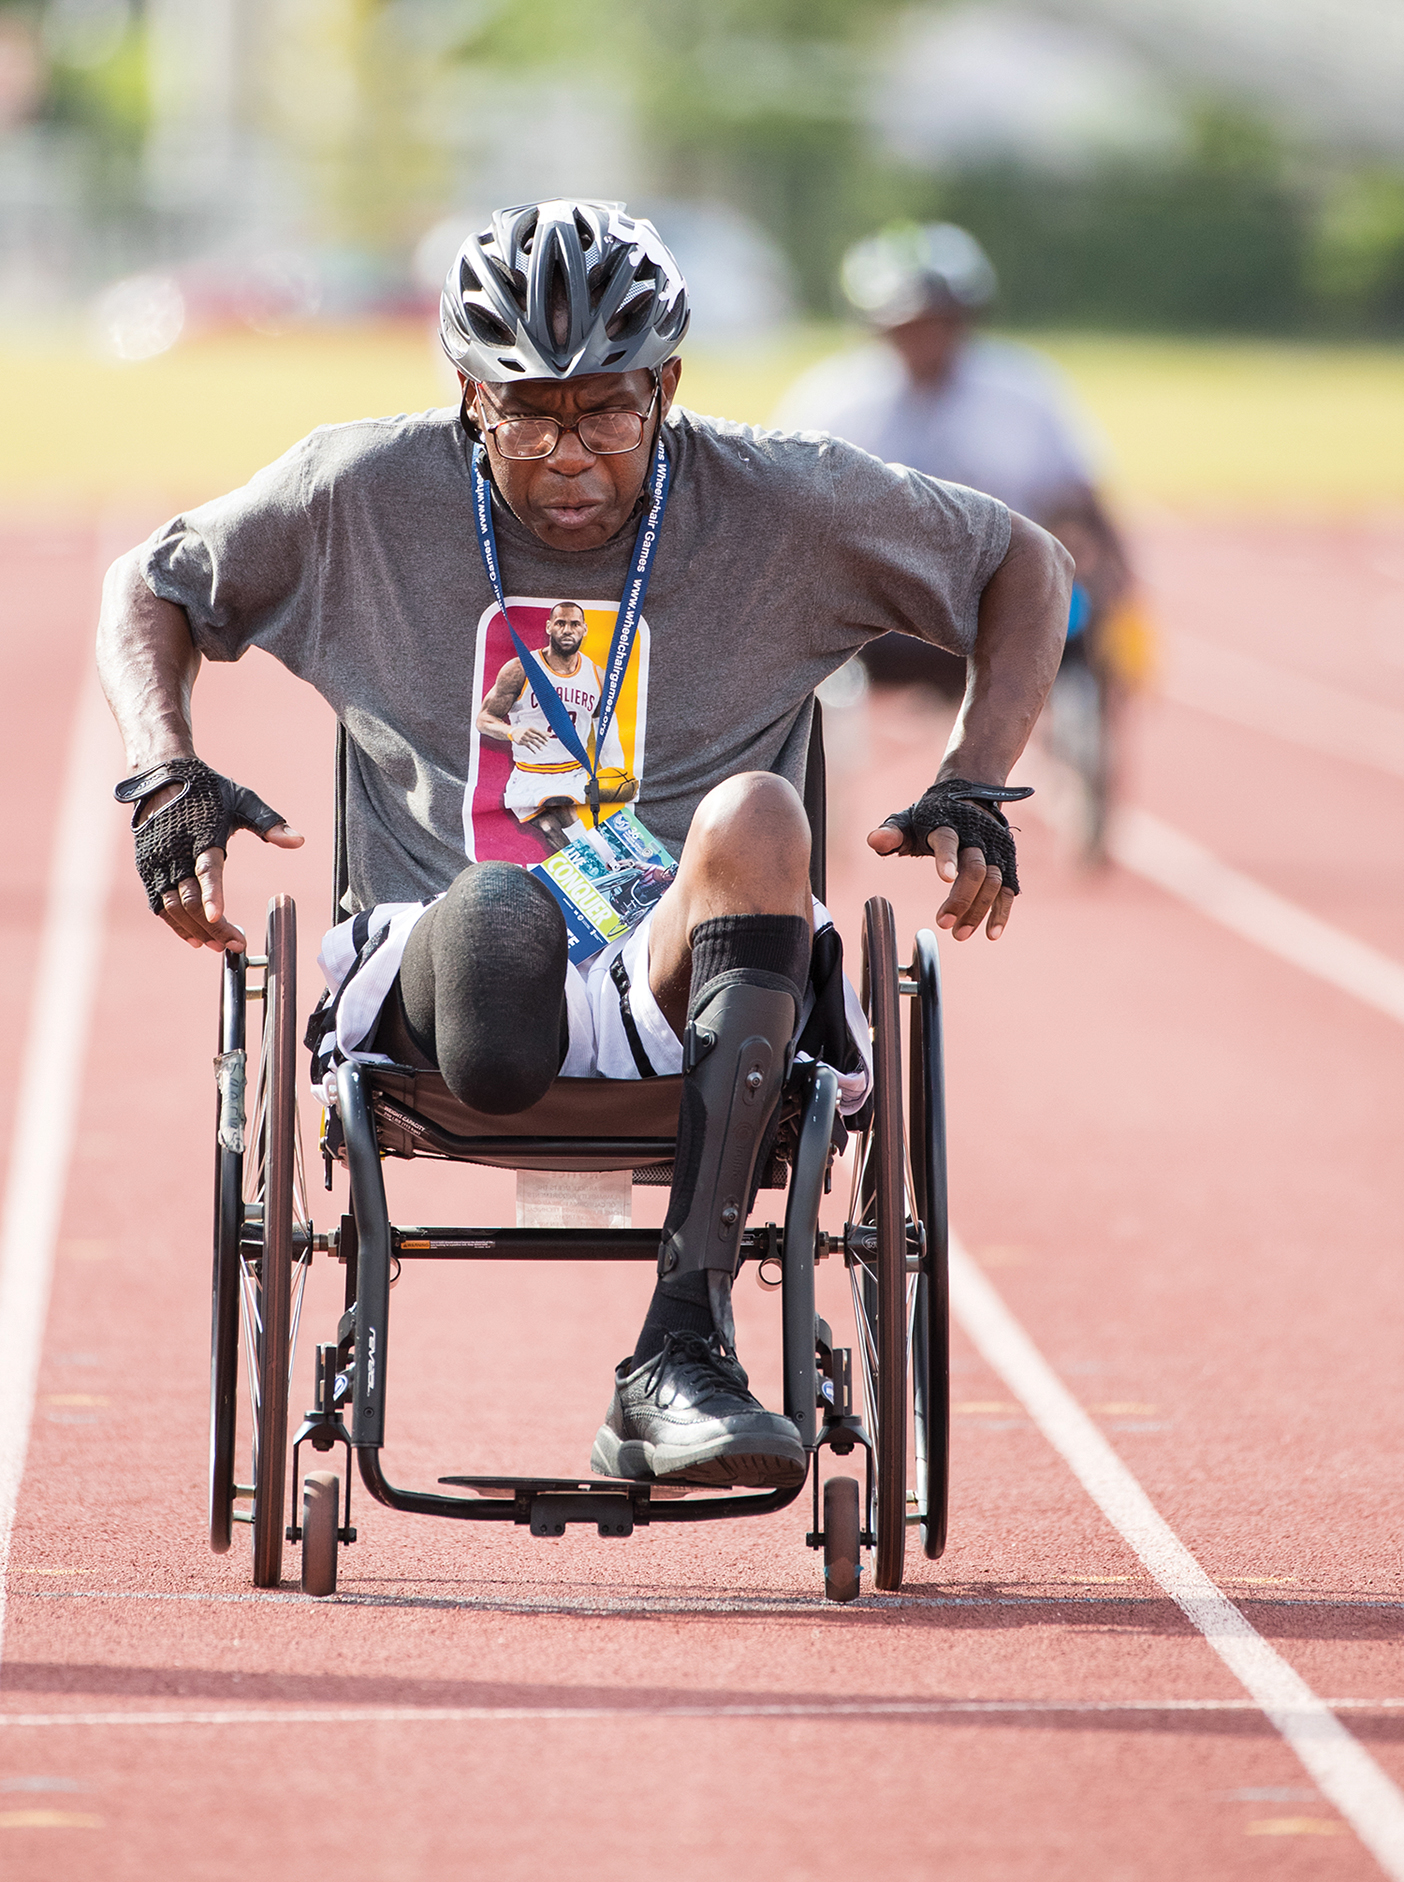 man in wheelchair on a track